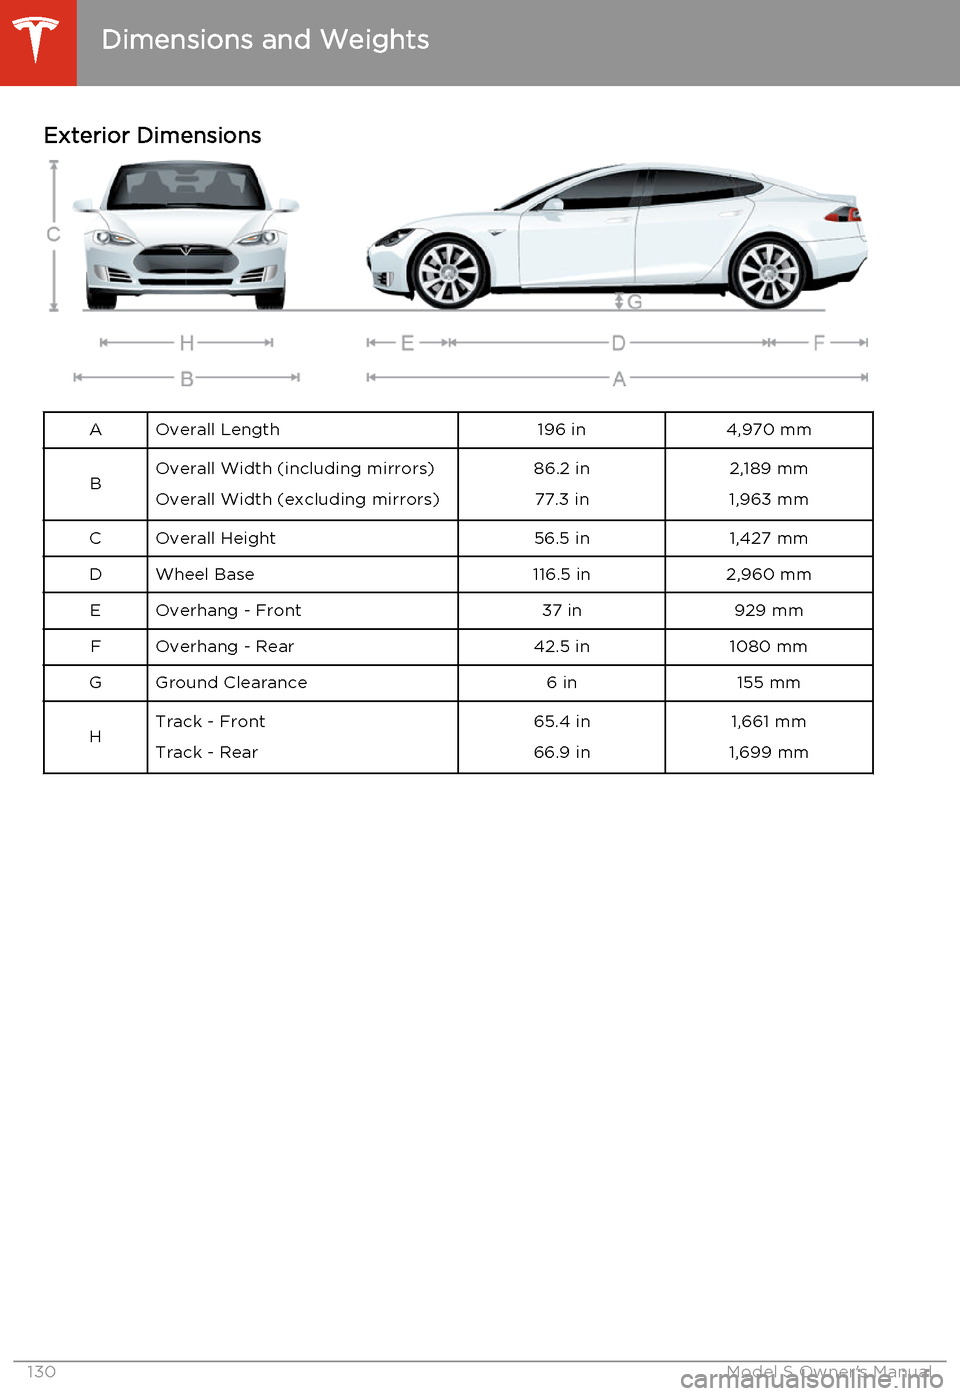 TESLA MODEL S 2014  Owners manual (North America) Exterior DimensionsAOverall Length196 in4,970 mmBOverall Width (including mirrors)
Overall Width (excluding mirrors)86.2 in 77.3 in2,189 mm
1,963 mmCOverall Height56.5 in1,427 mmDWheel Base116.5 in2,9